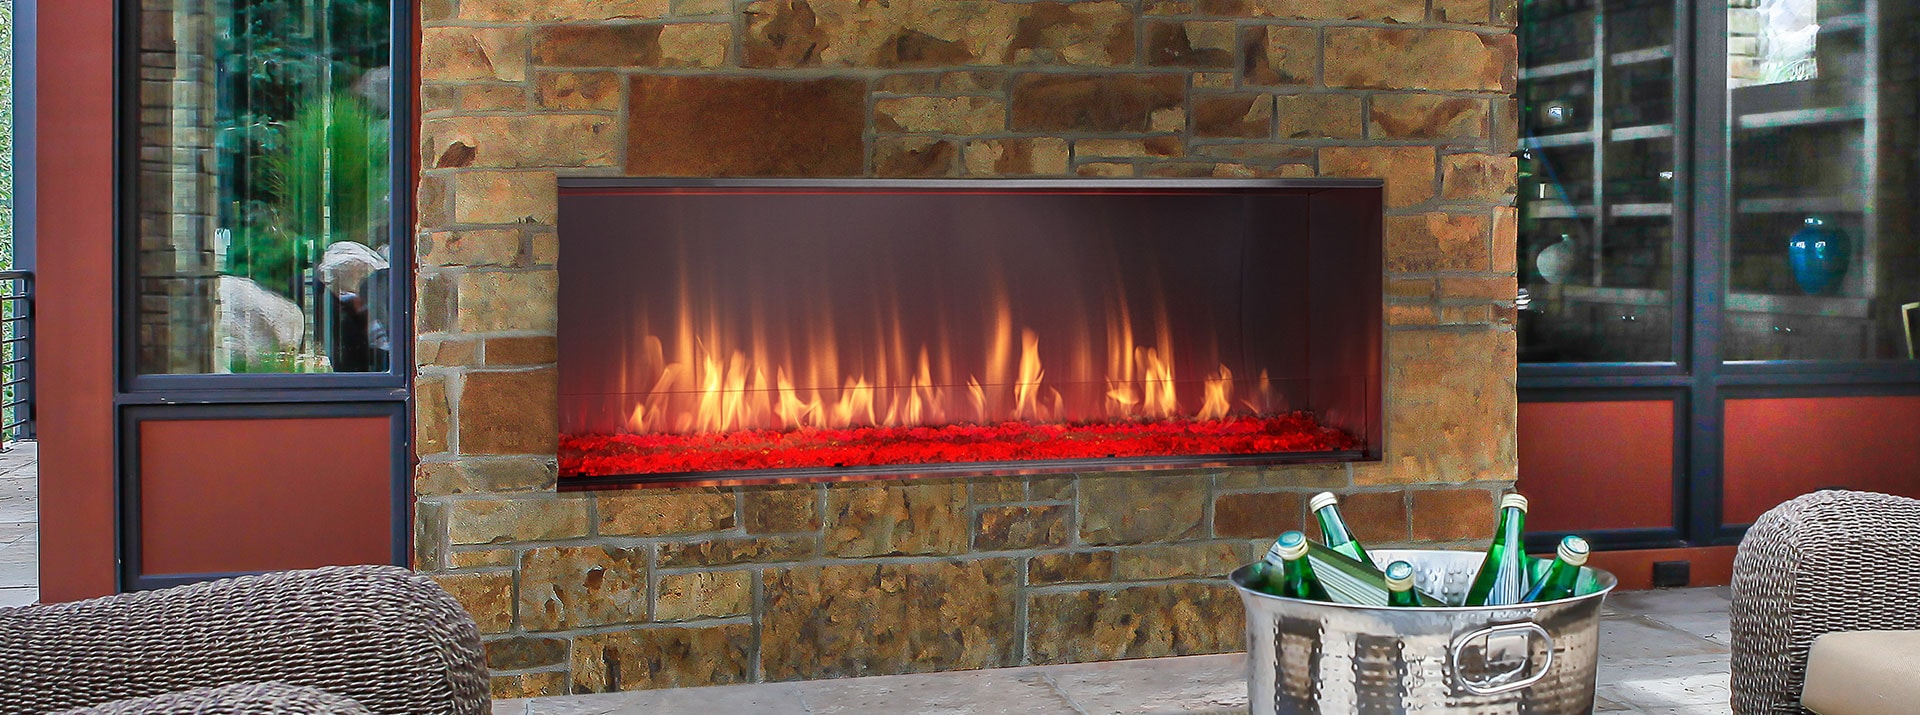 Indoor Ventless Gas Fireplace Best Of Lanai Gas Outdoor Fireplace